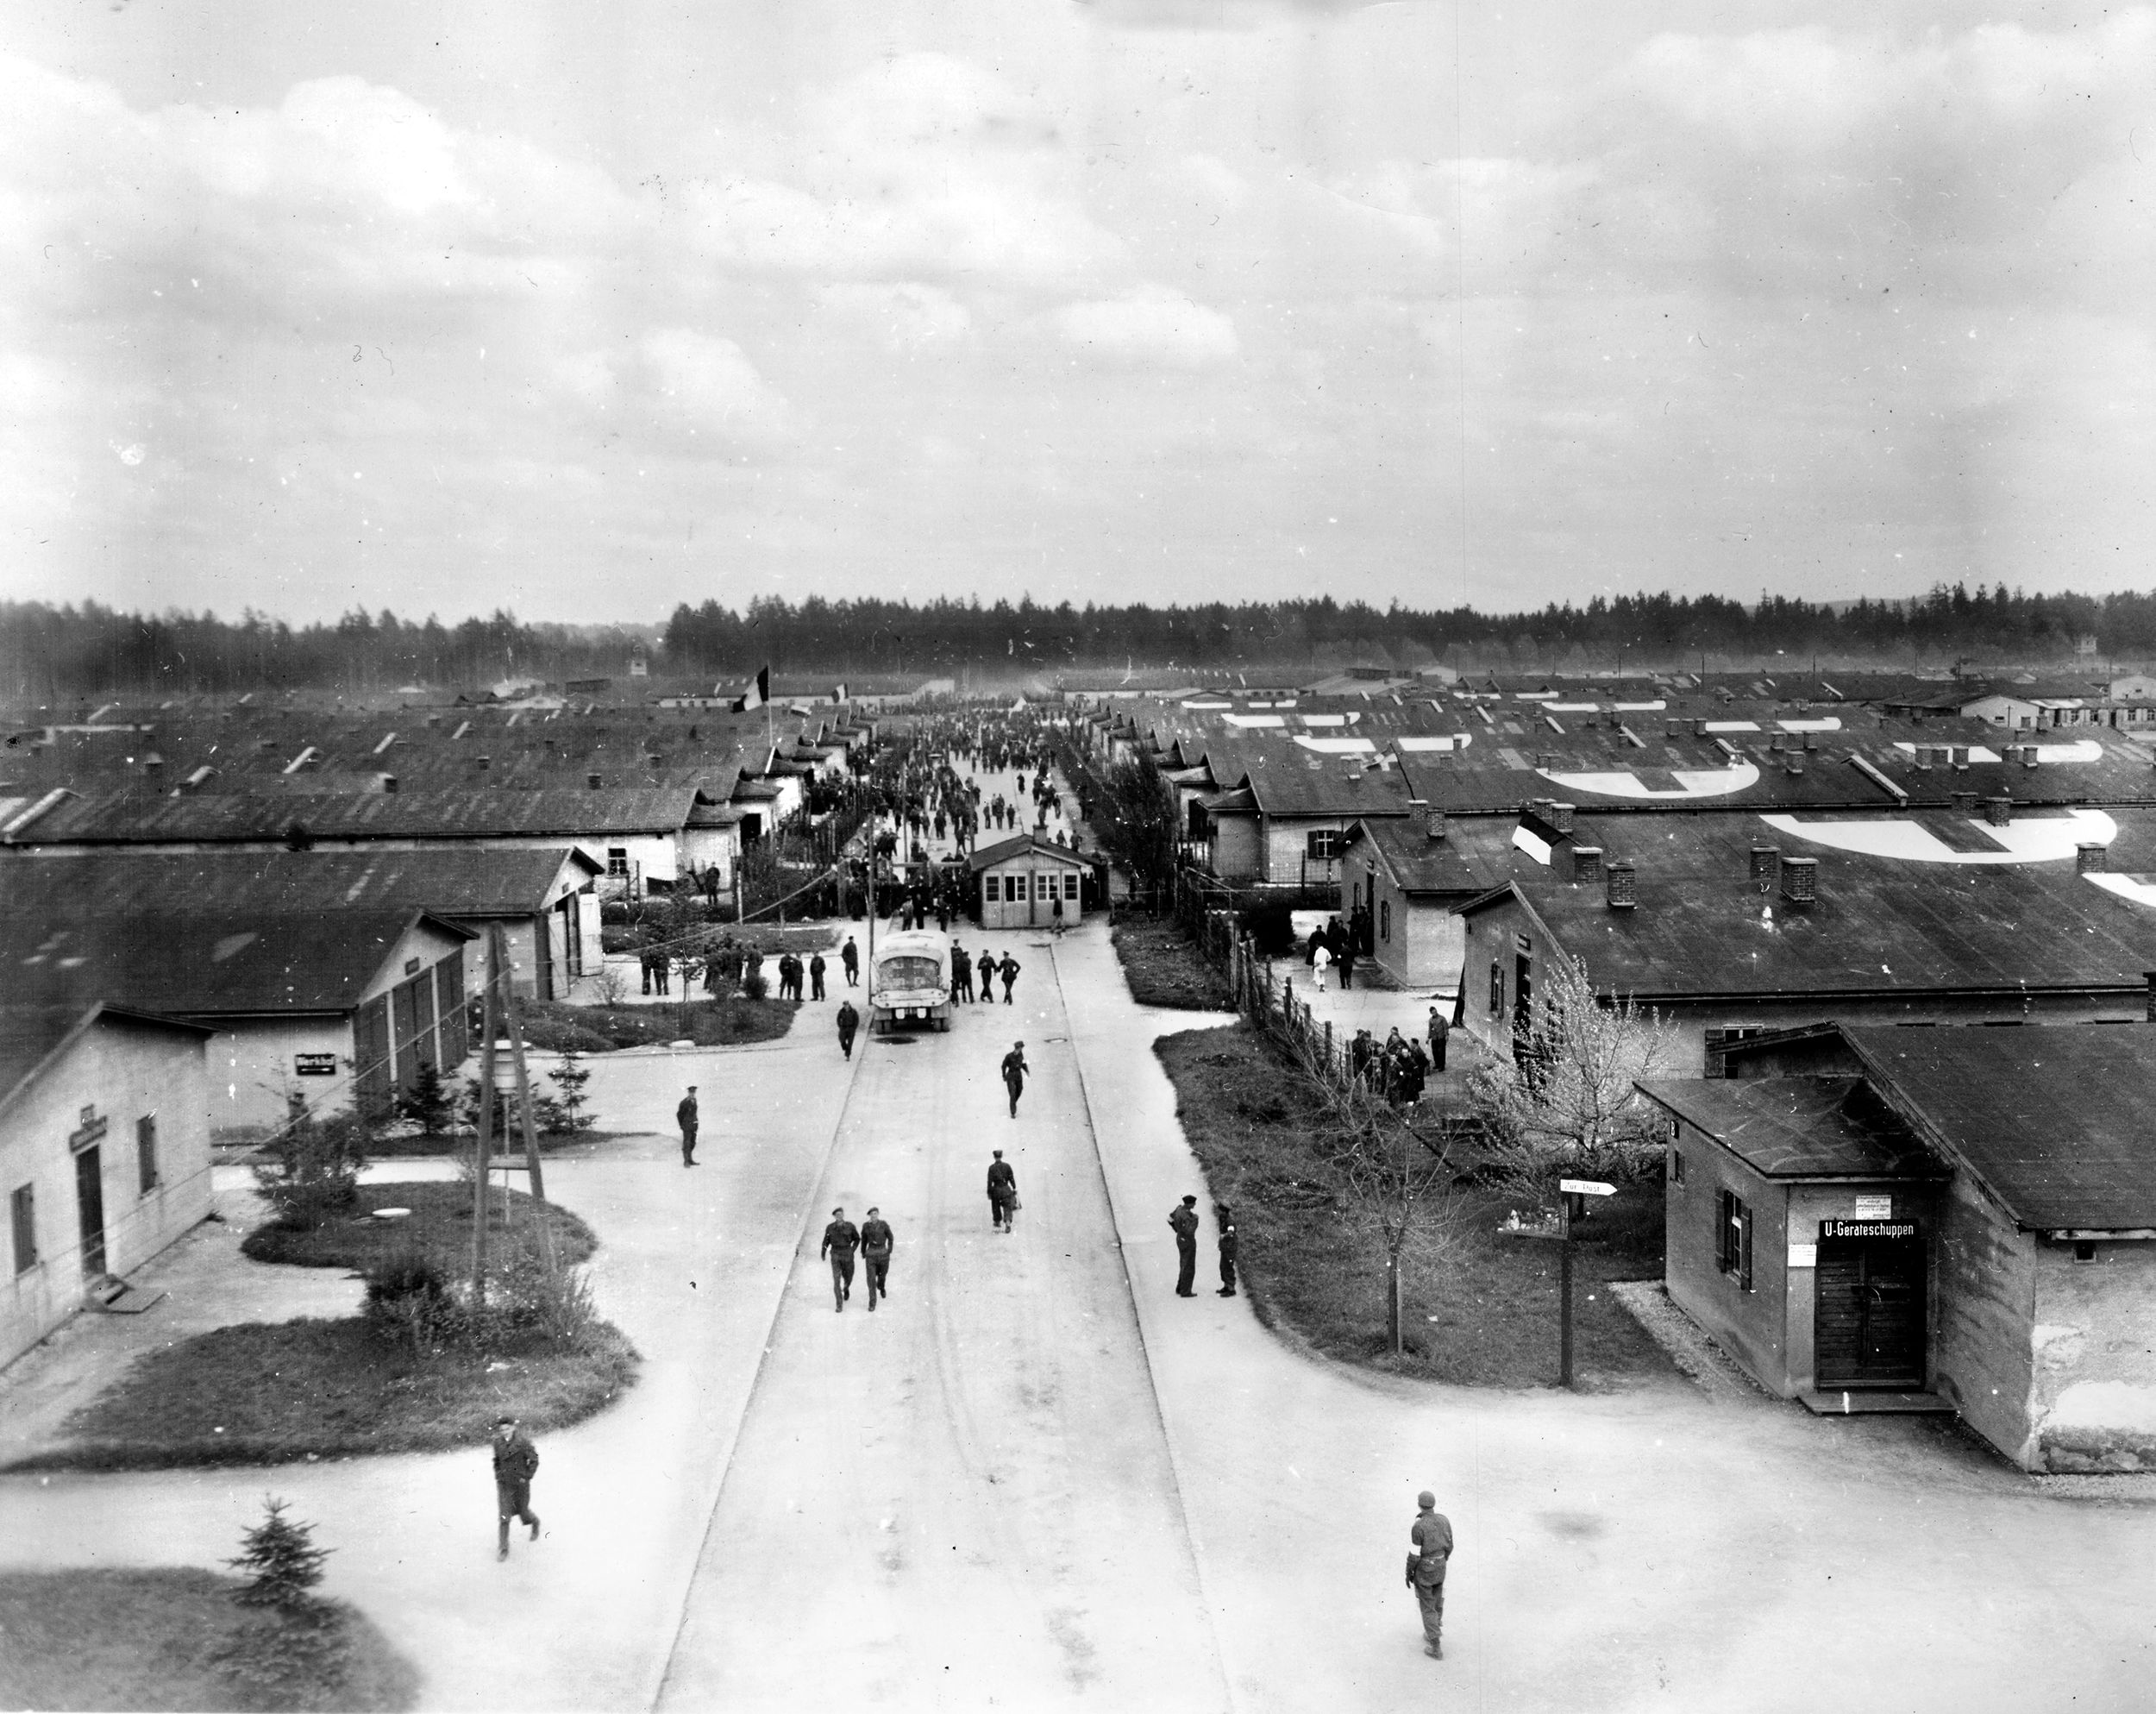 Nearly a year after the “great escape,” from Stalag Luft III, Ben Ernst and many of the other prisoners were moved to the larger—but overcrowded—Stalag VII-A, near Munich. It held over 100,000 prisoners at one point.